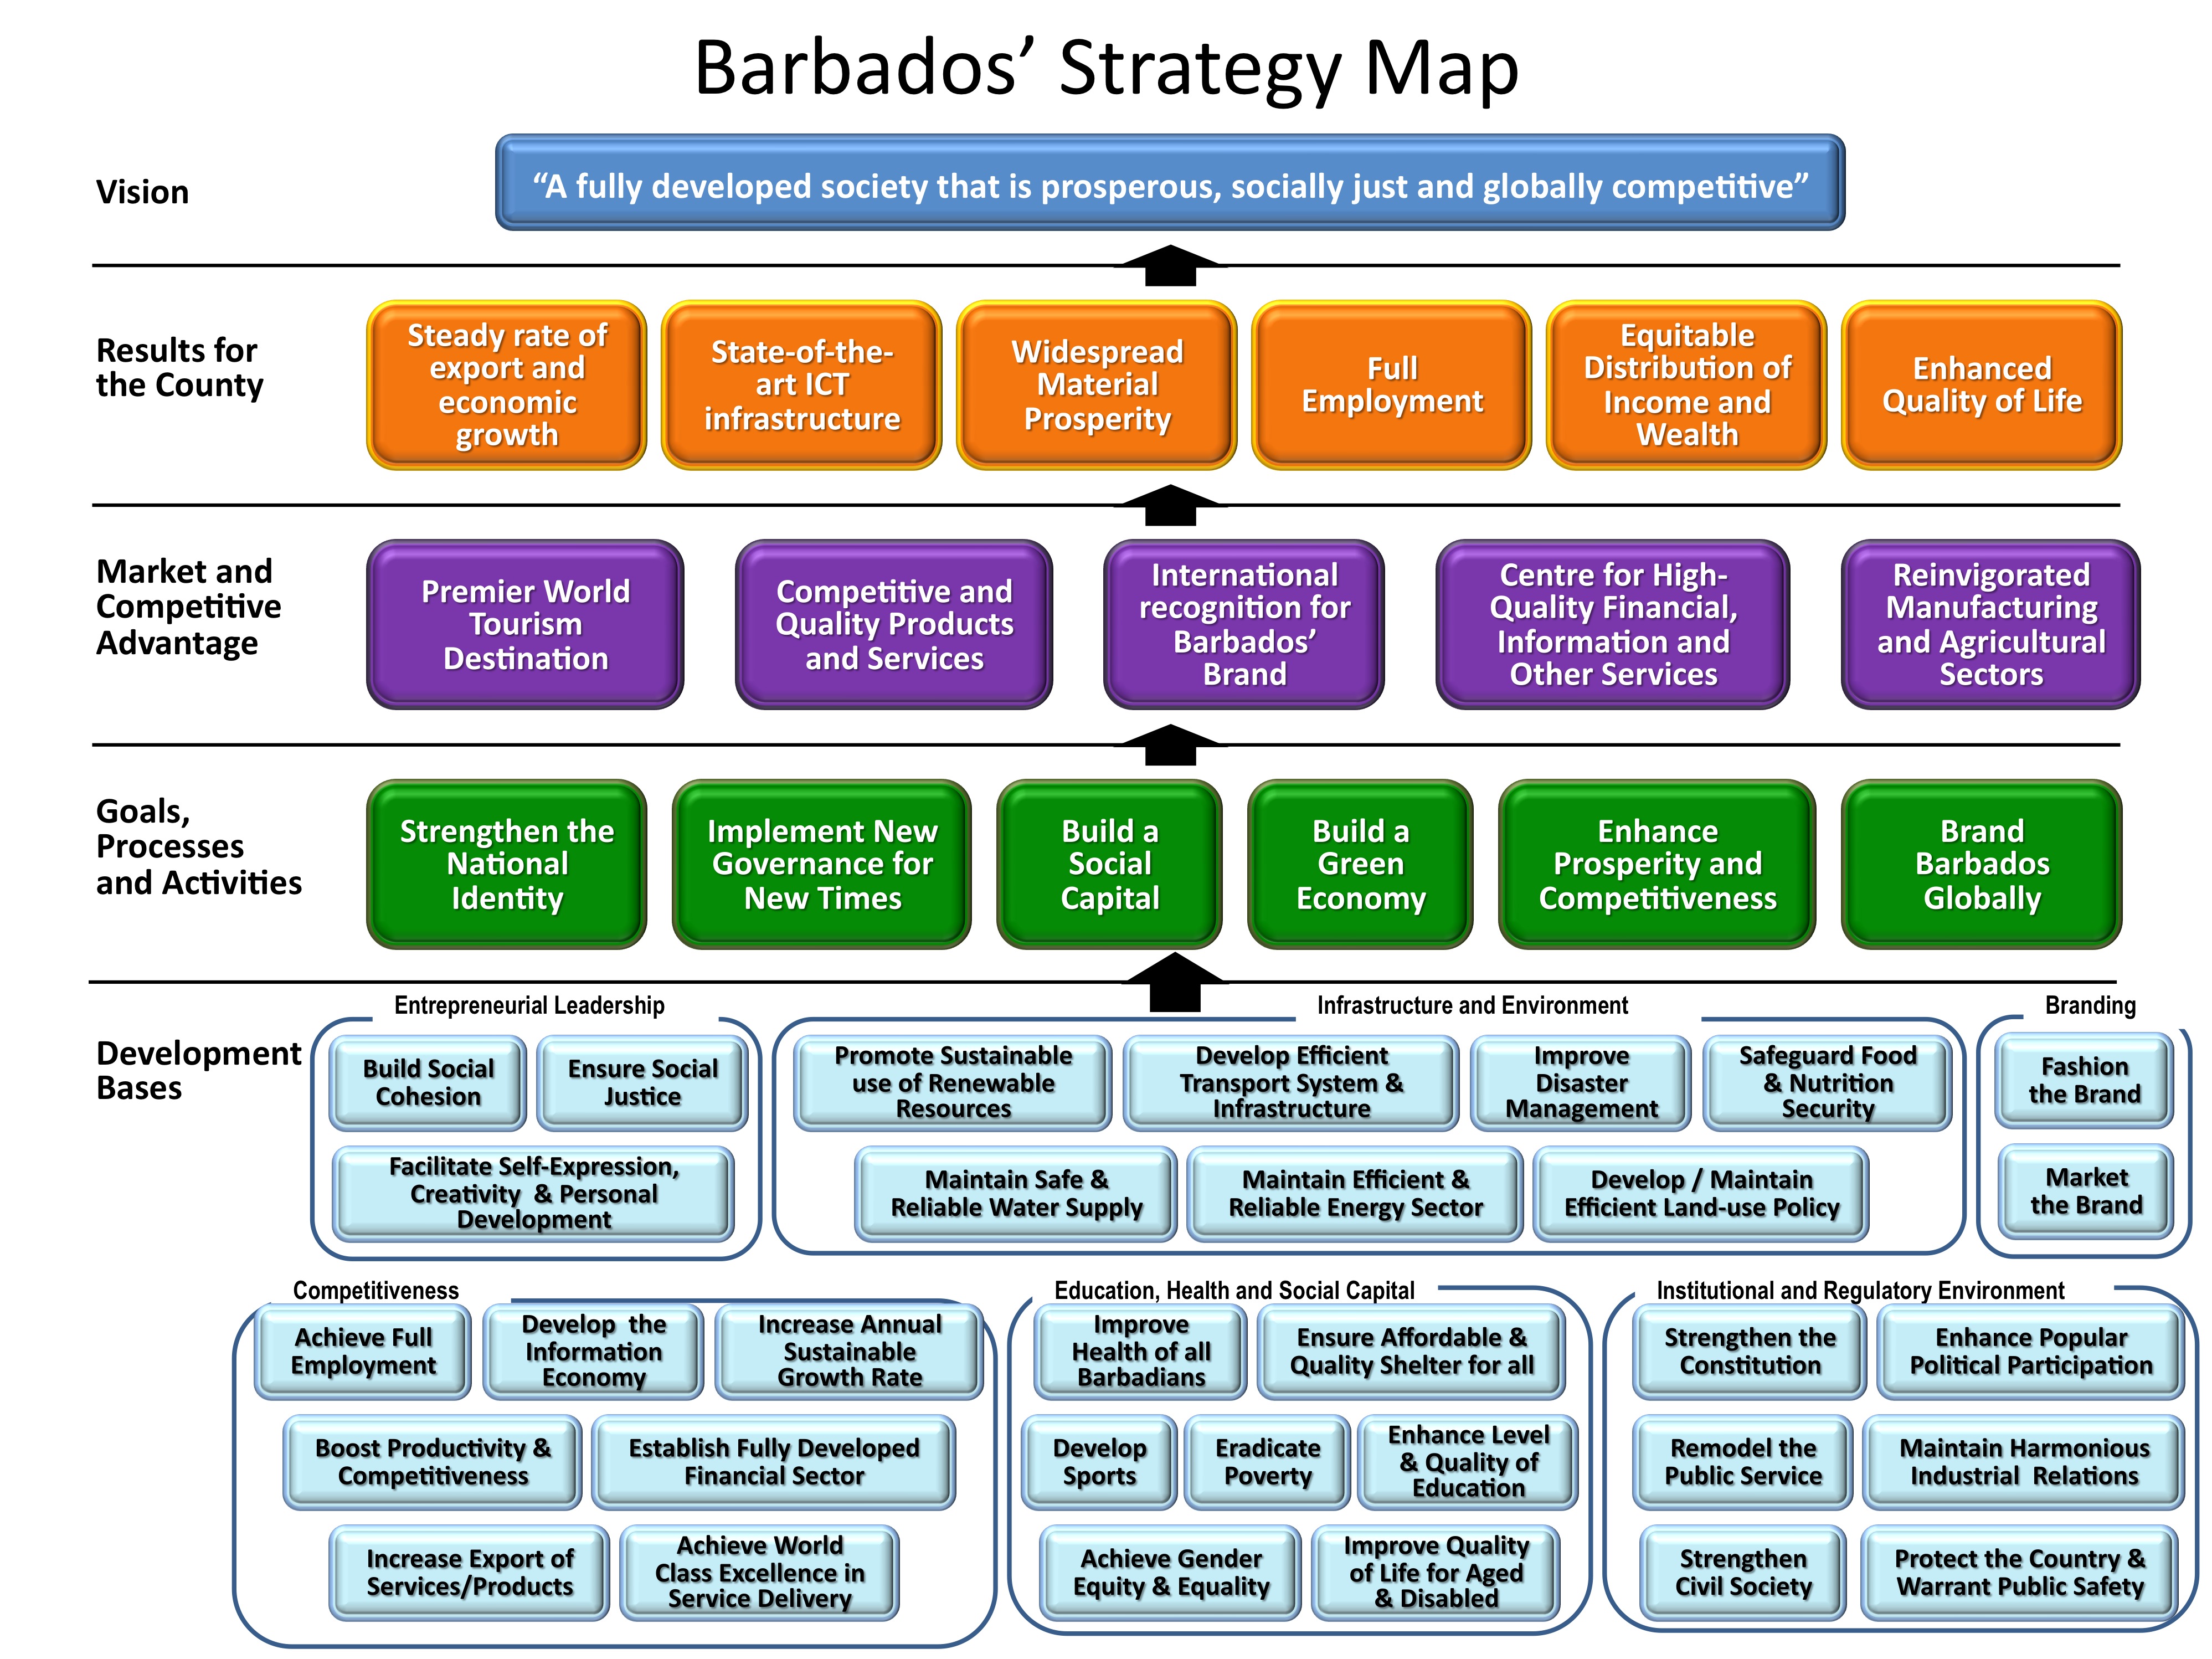 Strategy map analysis examples - Barbados